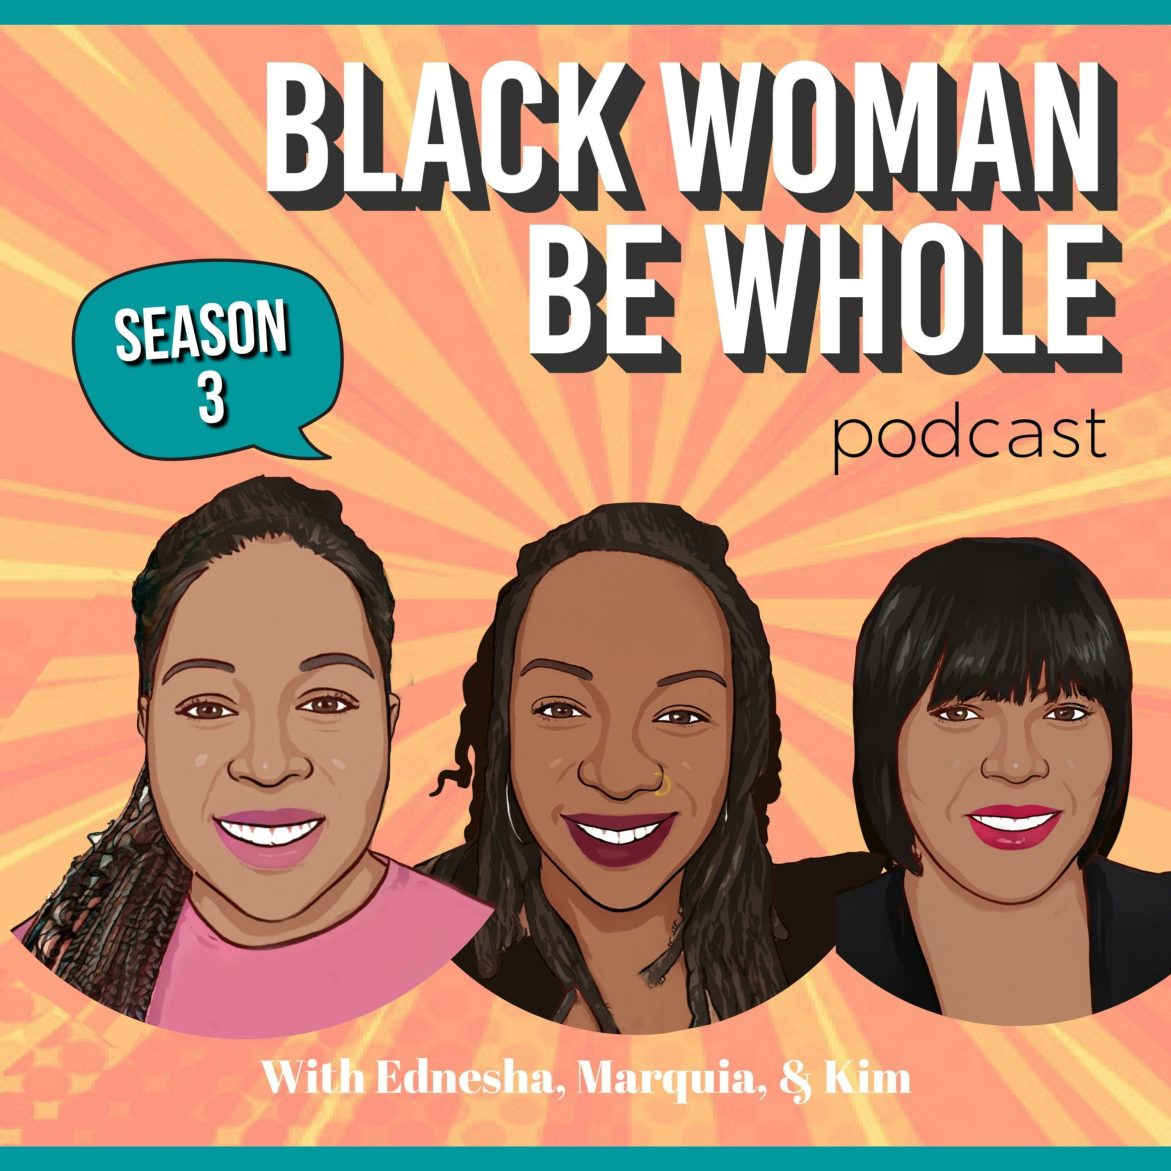 Black Podcasting - Working on Our Healing Journeys